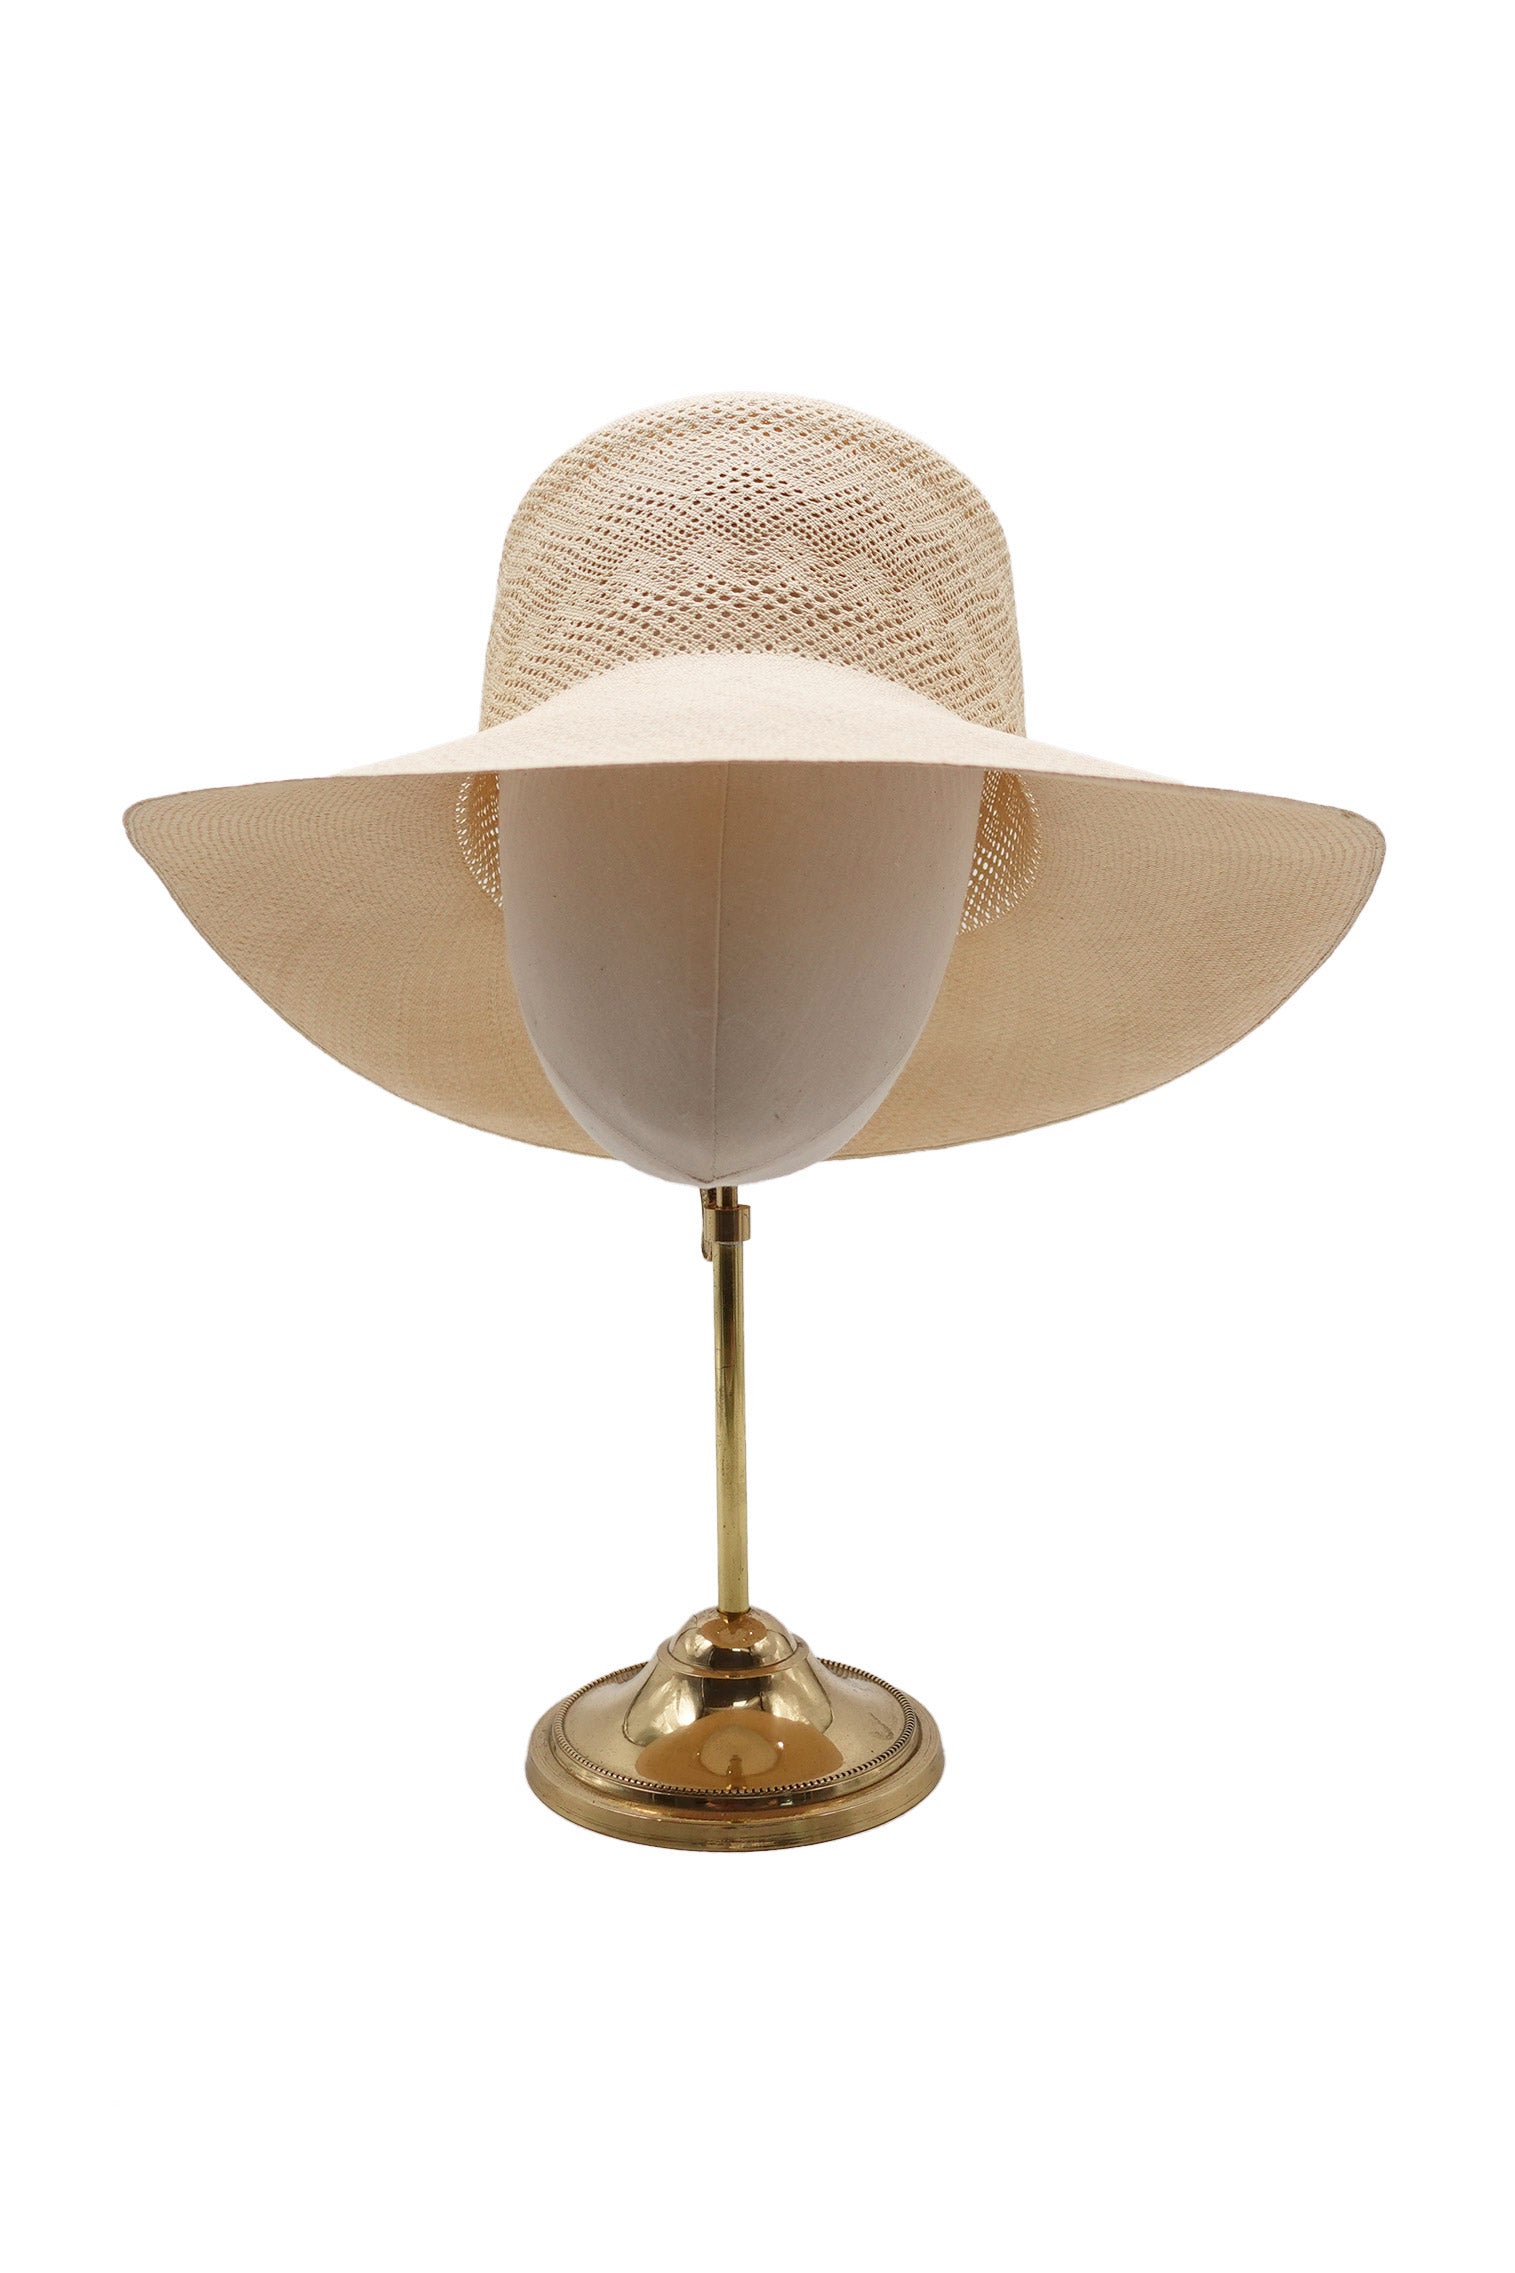 Katelyn Woven Panama - The Bespoke Embroidered Panama Hat Collection - Lock & Co. Hatters London UK